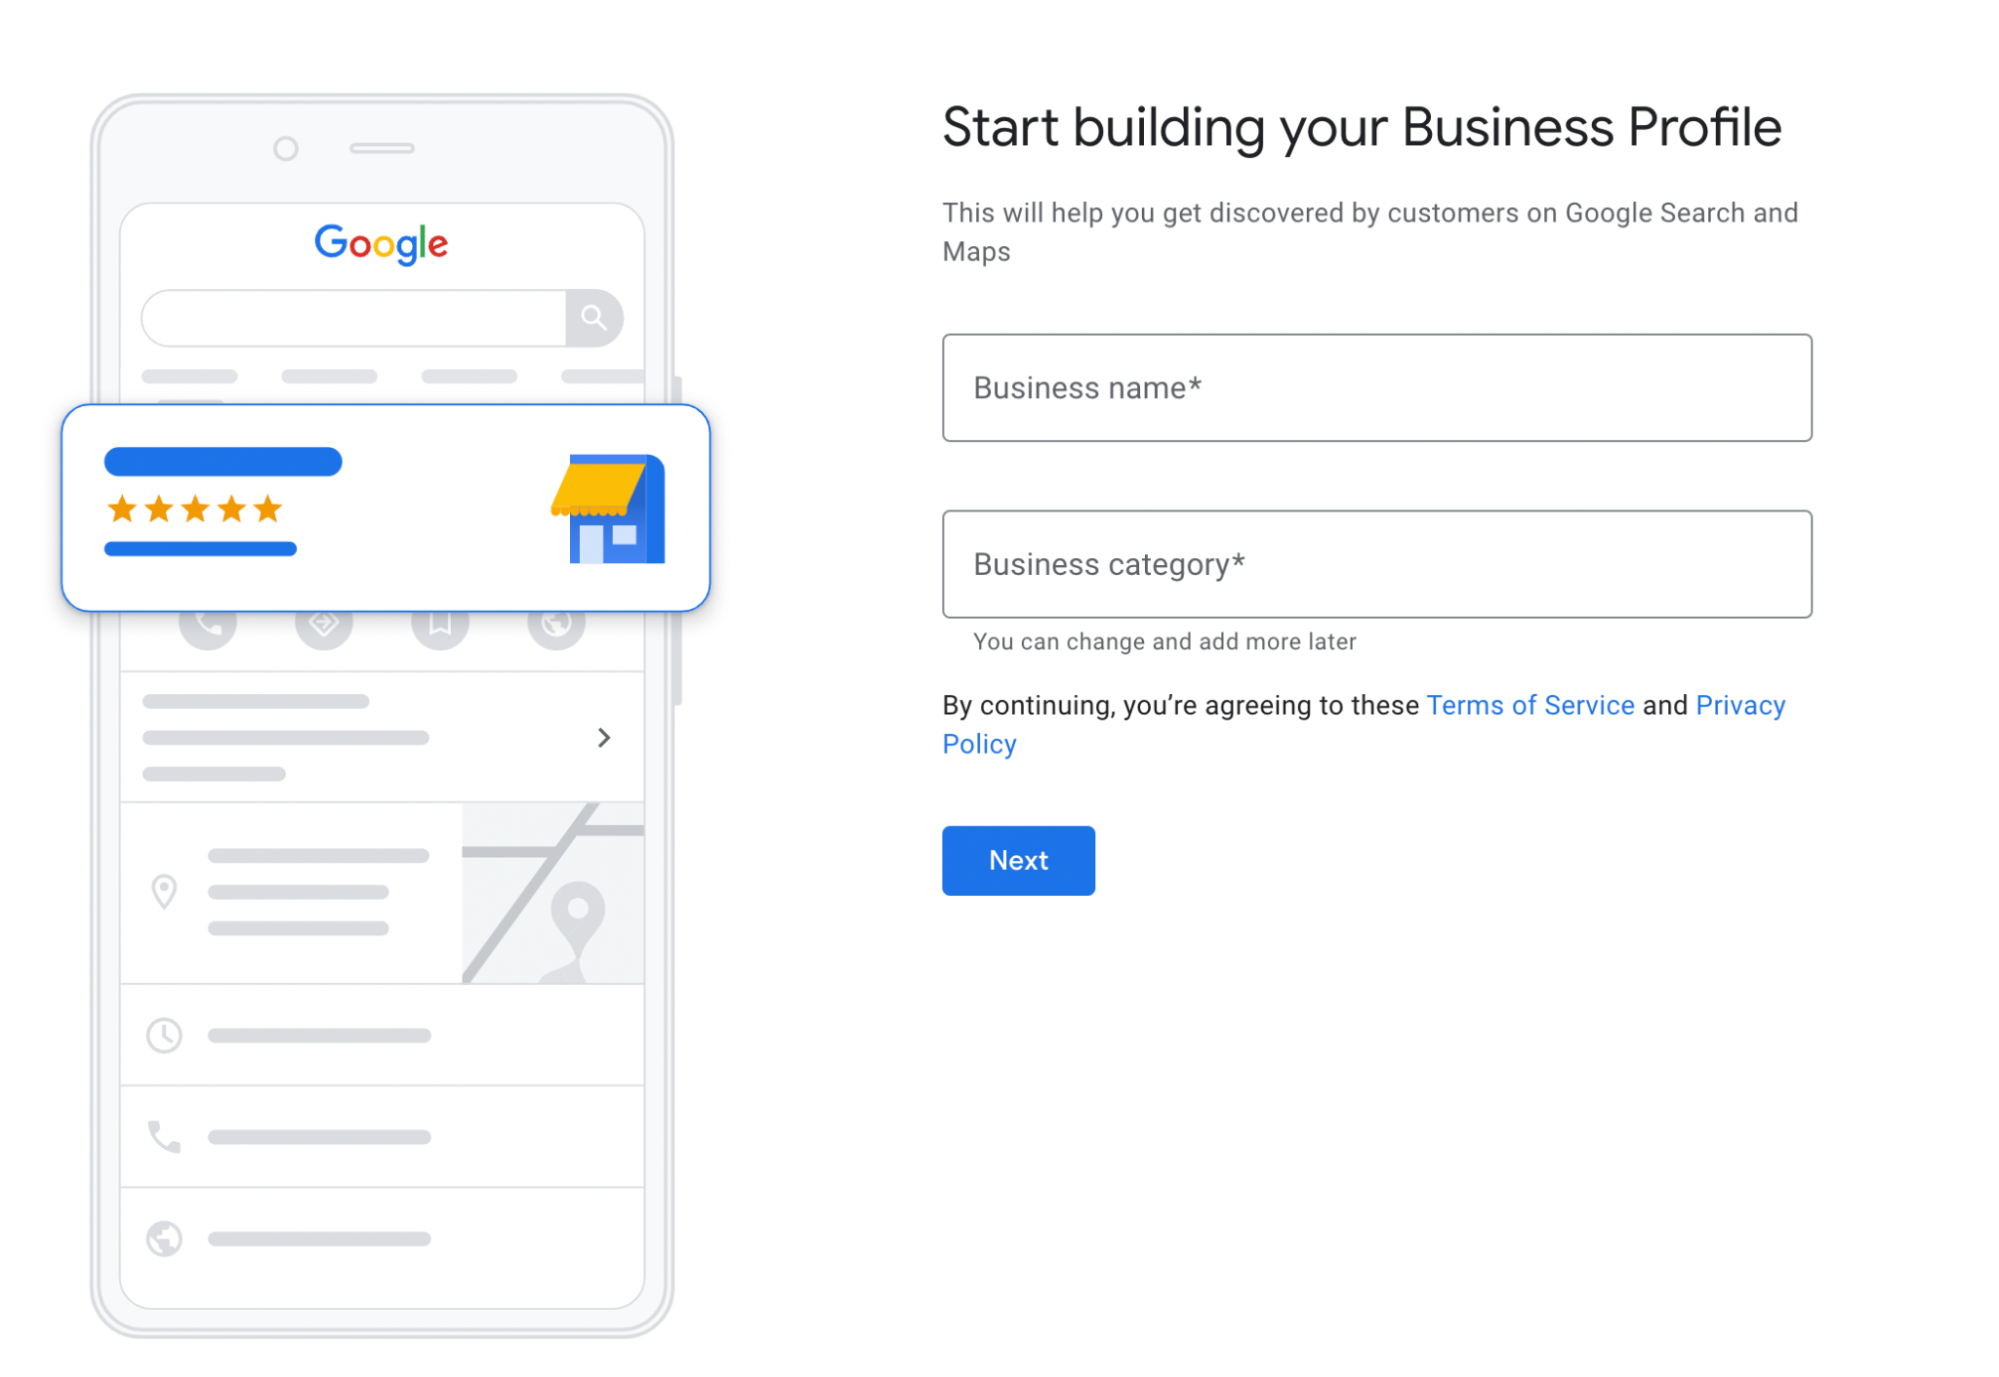 Start building your business profile